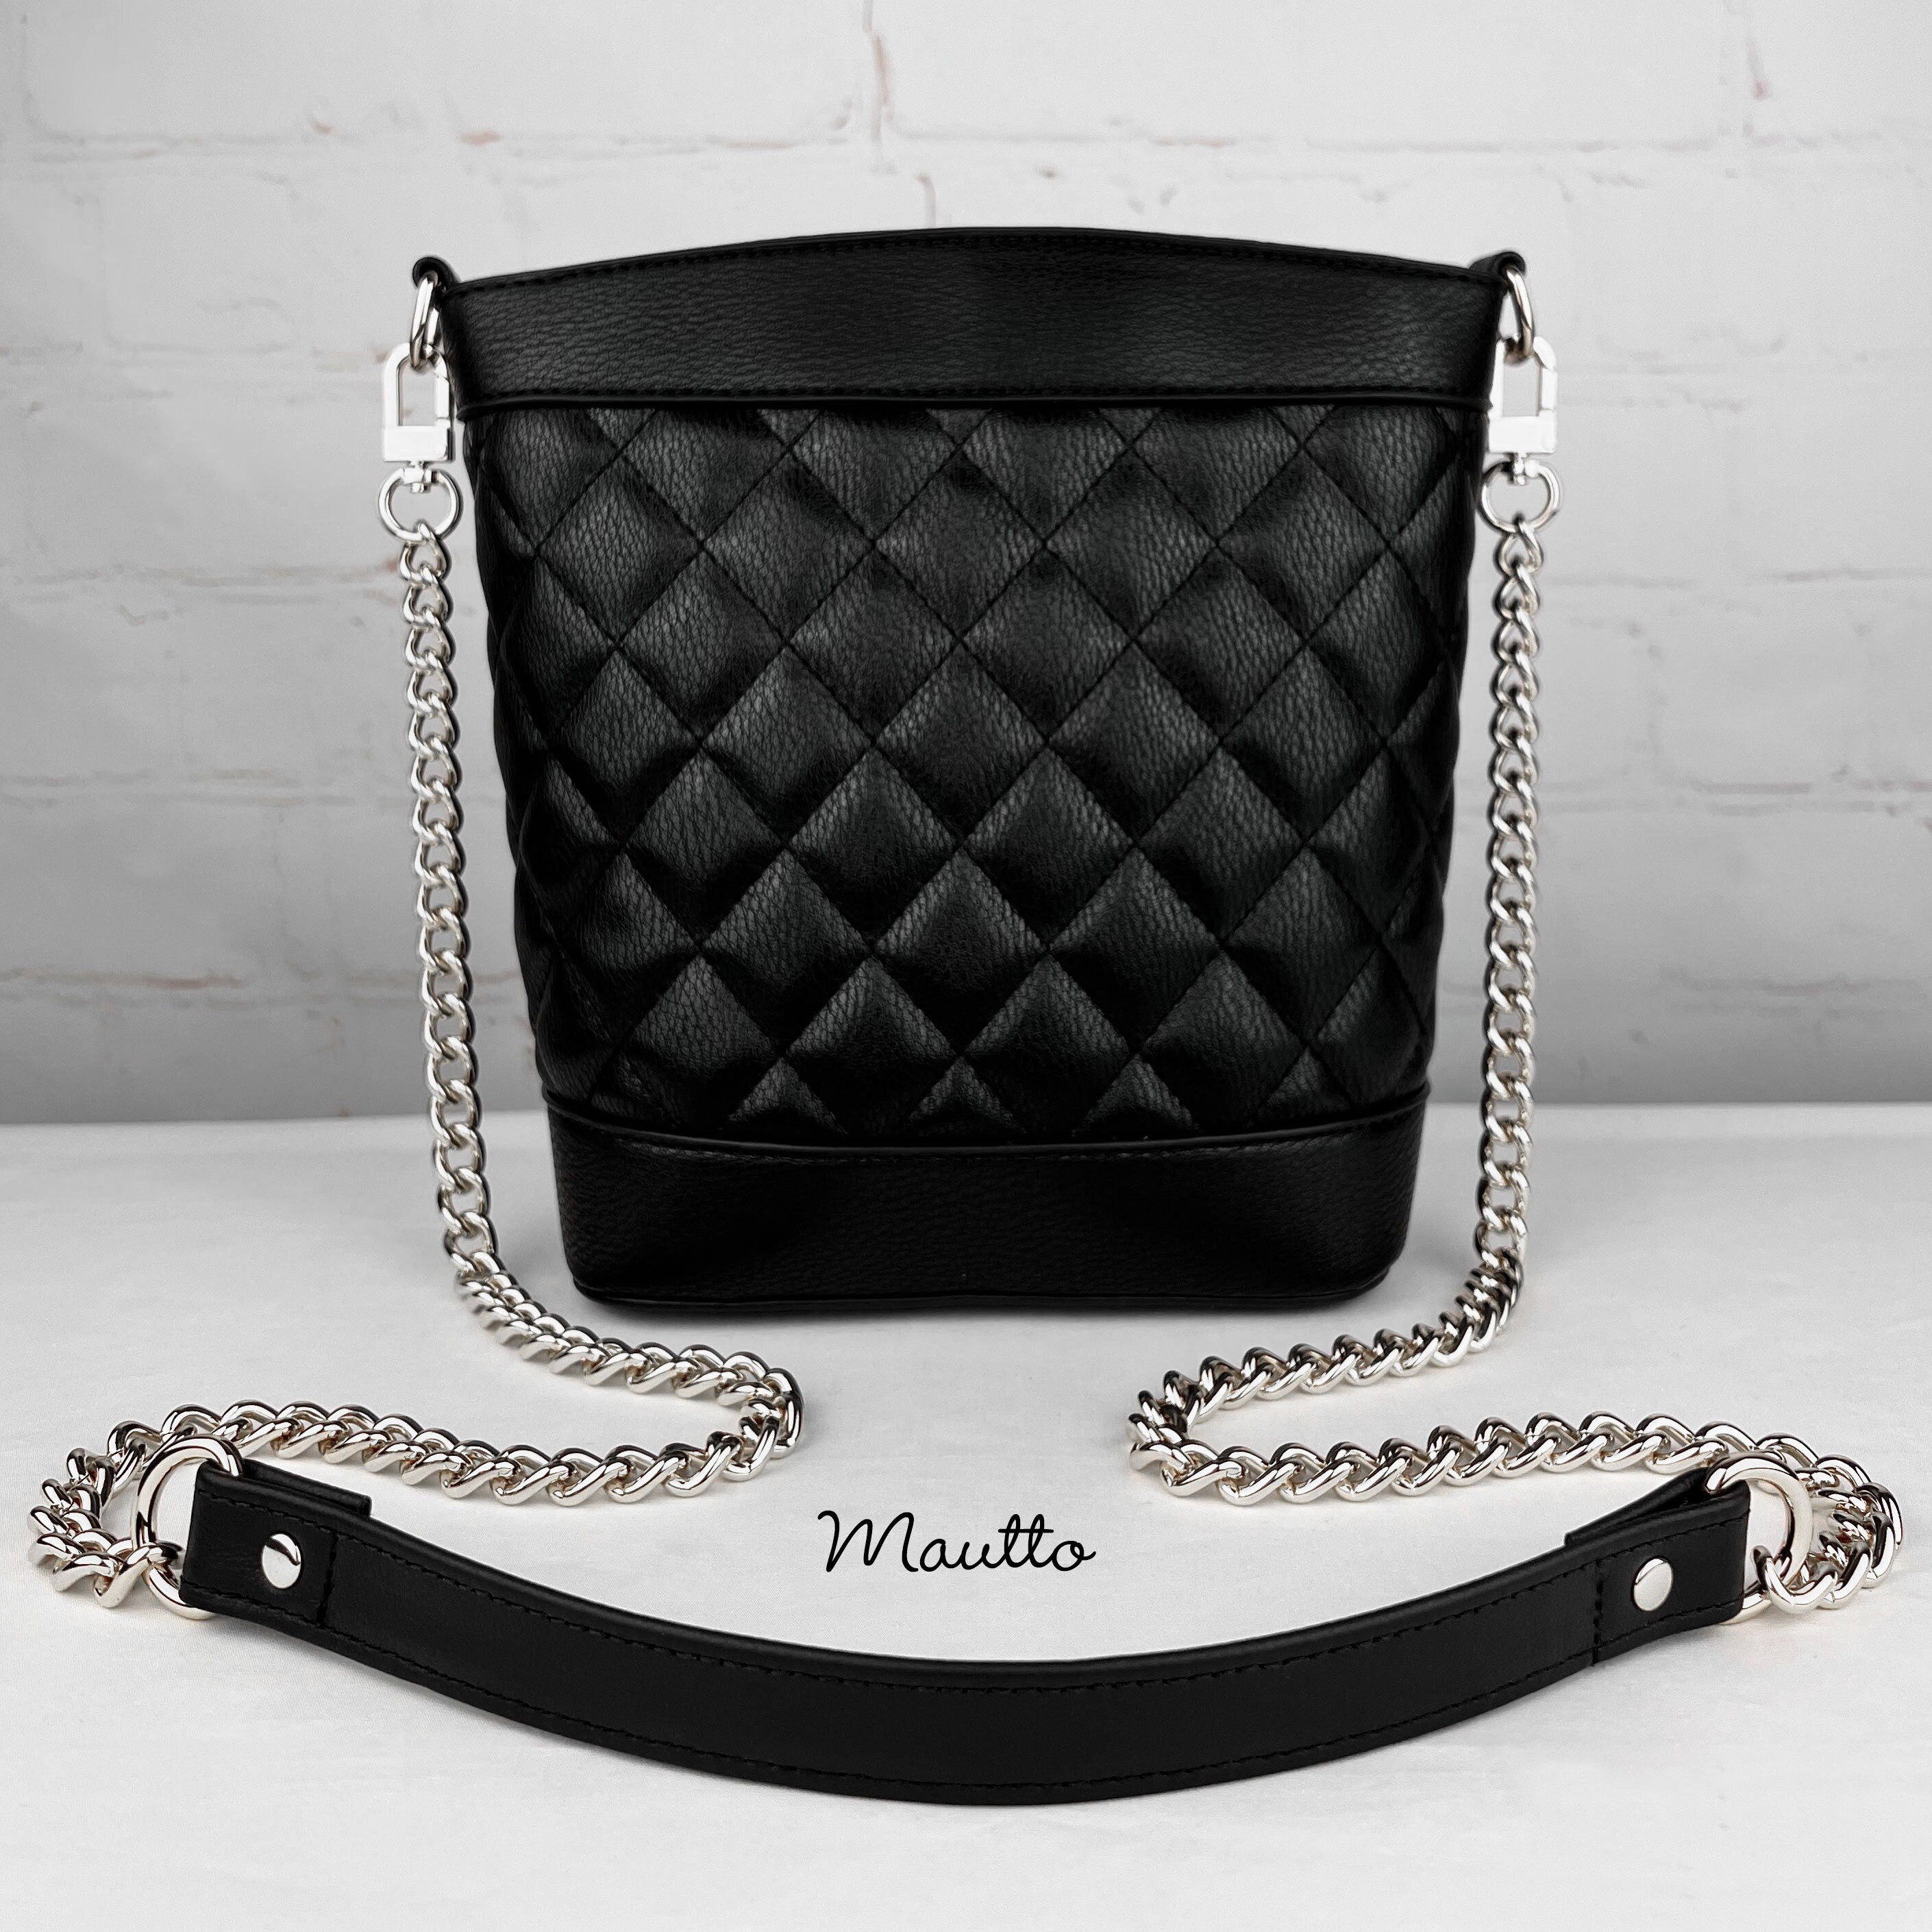 Chanel Lambskin Leather Soft and Chain Large Hobo Bag